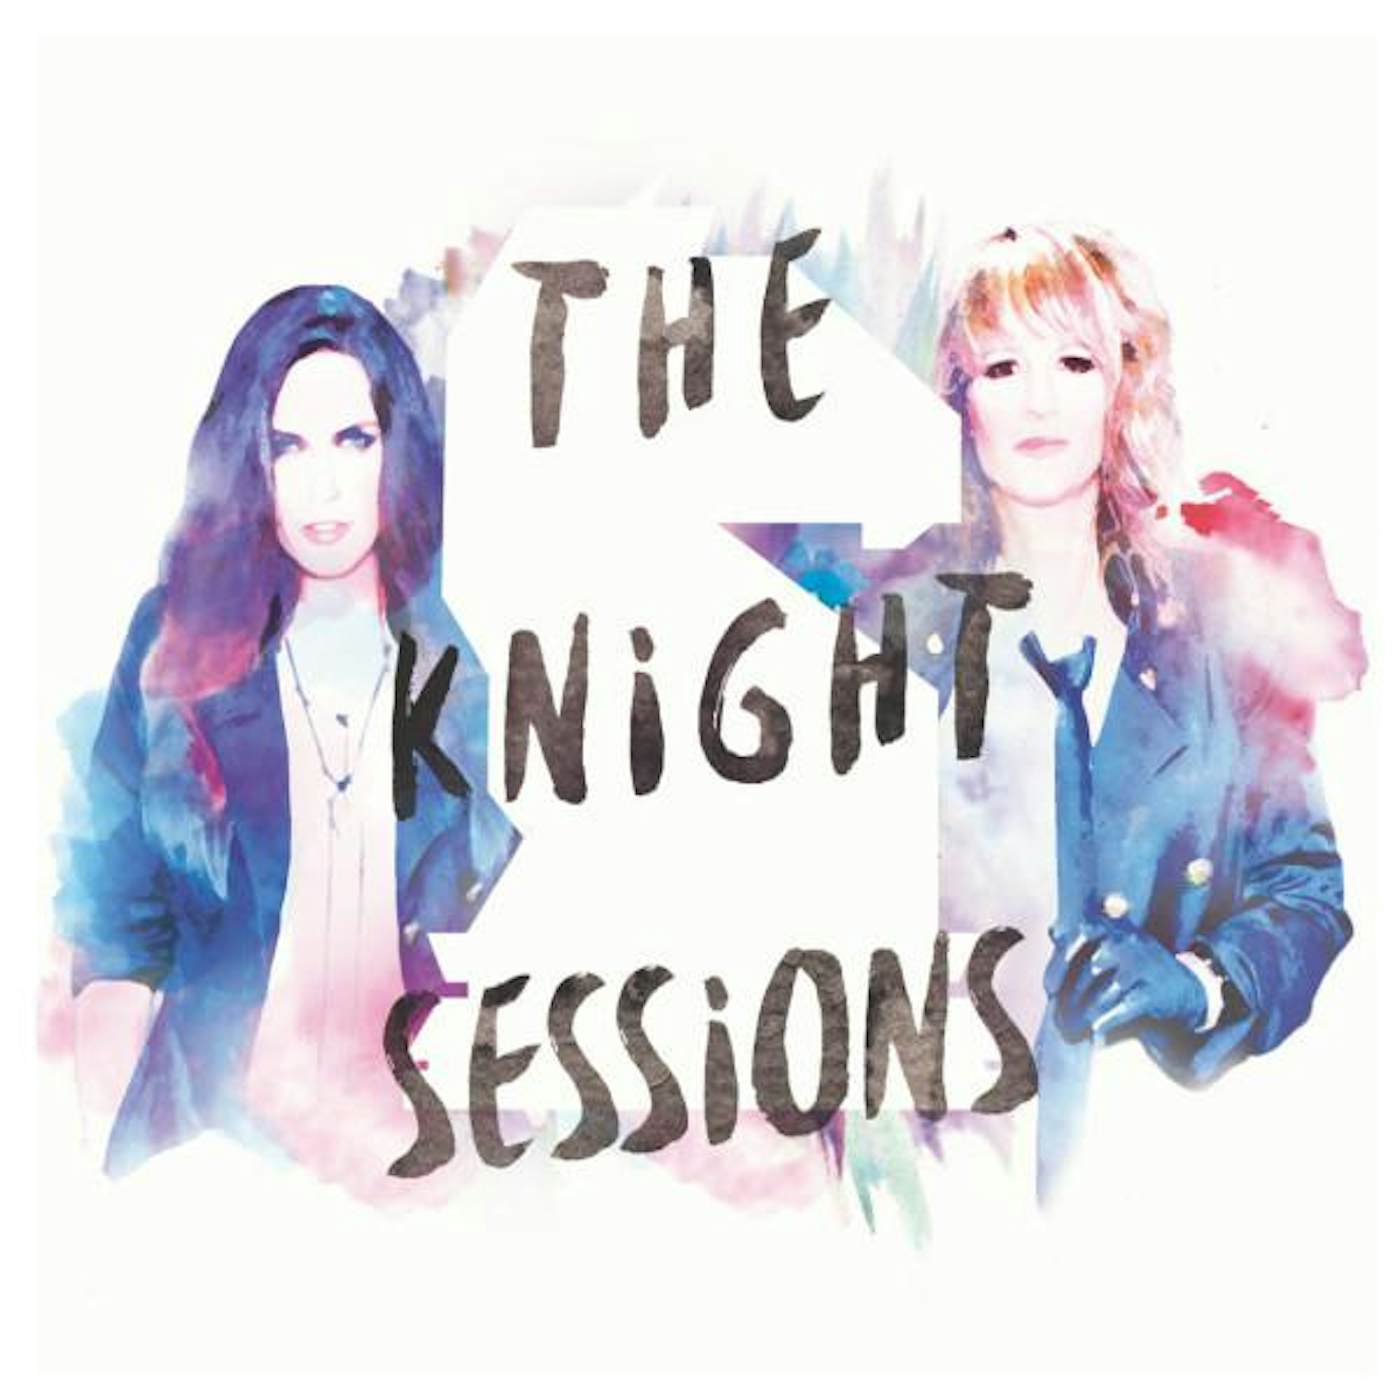 Madison Violet KNIGHT SESSIONS CD